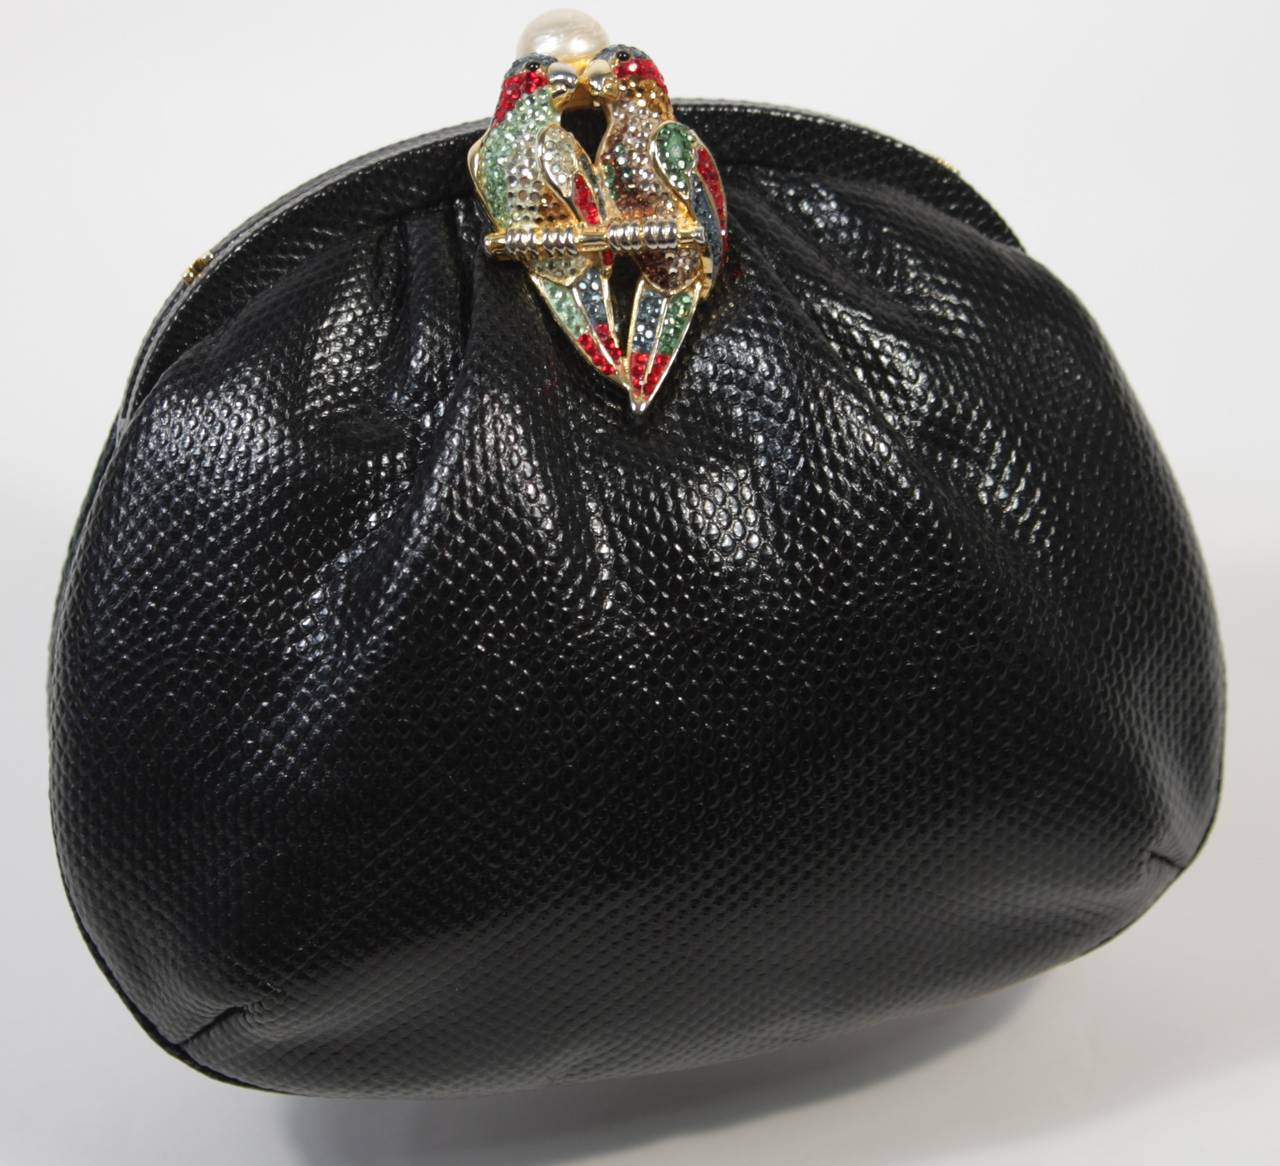 This vintage Judith Leiber handbag is composed of a black lizard and features an embellished parrot clasp topped with a pearl. In excellent condition; comes with original dust bag.

**Please cross-reference measurements for personal